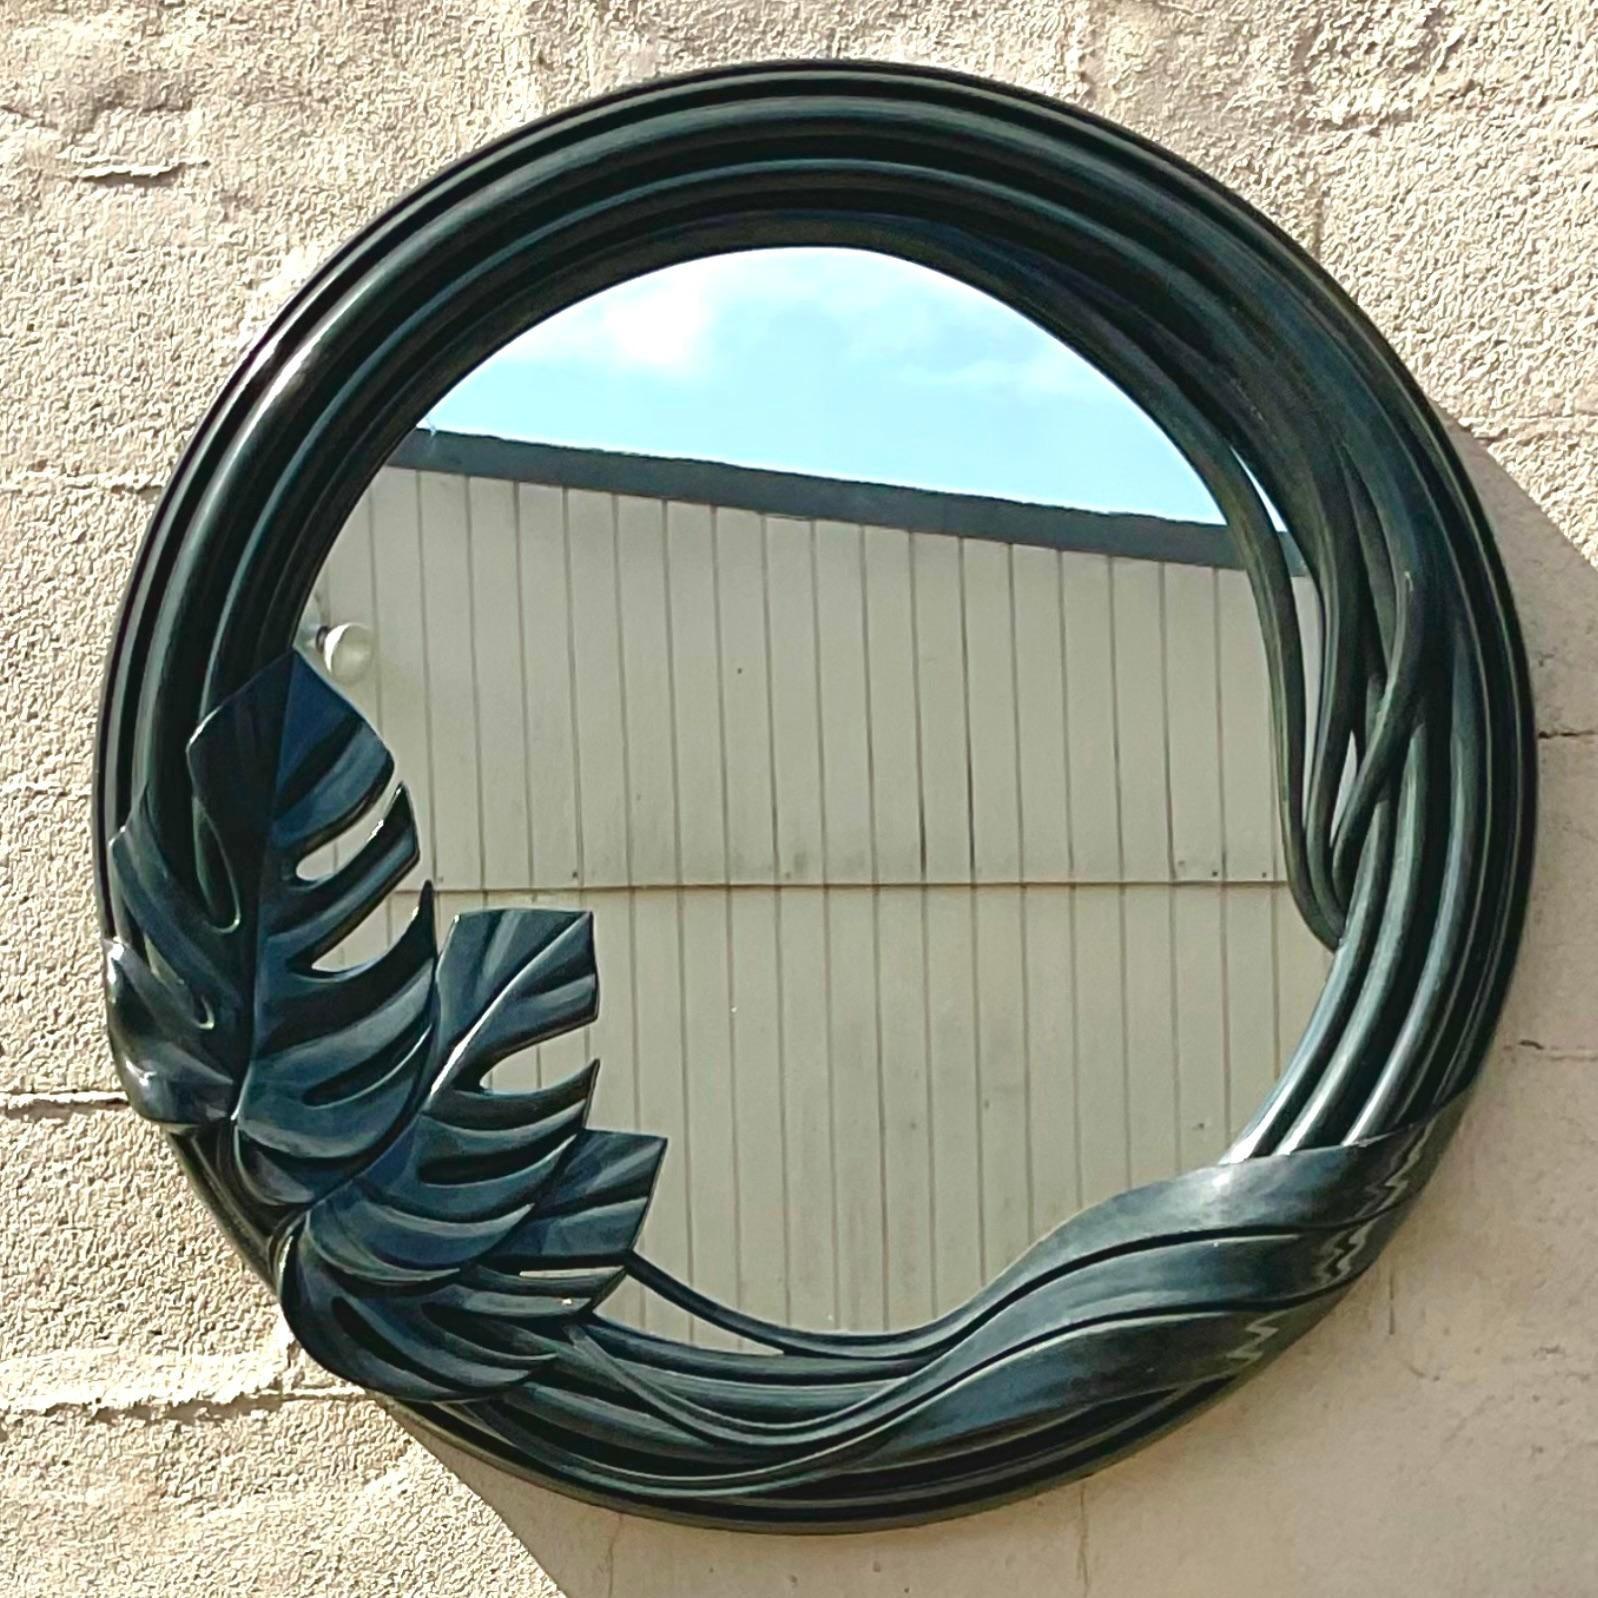 A fabulous vintage Boho wall mirror. A chic round frame with a Monstera motif. Lacquered a deep forest green. Acquired from a Palm Beach estate.